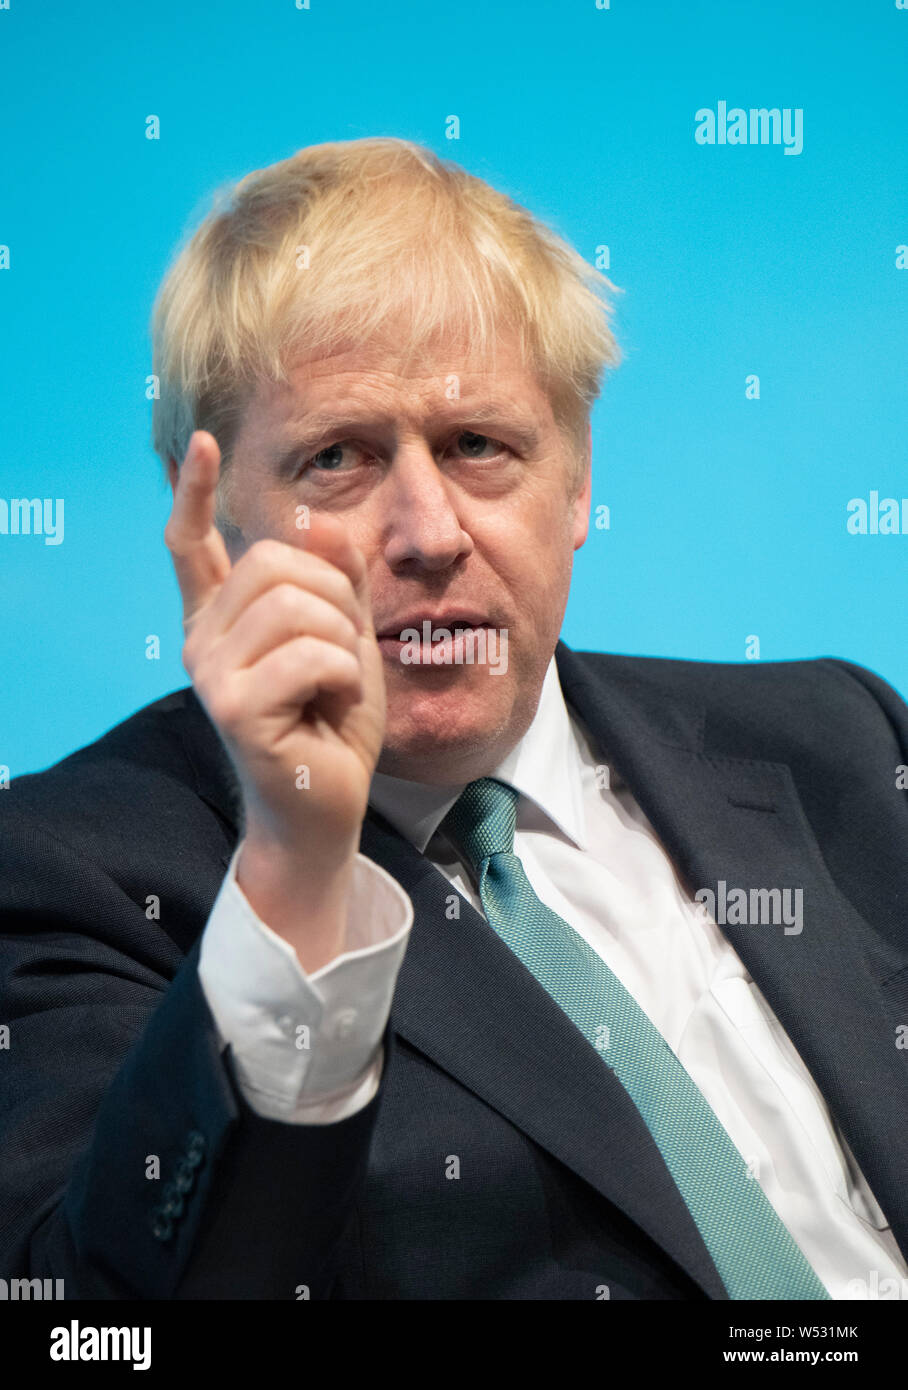 Conservative leadership candidate Boris Johnson arrives before speaking to an audience of party members as he takes part in a Conservative Party leadership hustings event at York Barbican on July 04, 2019 in York, England Stock Photo